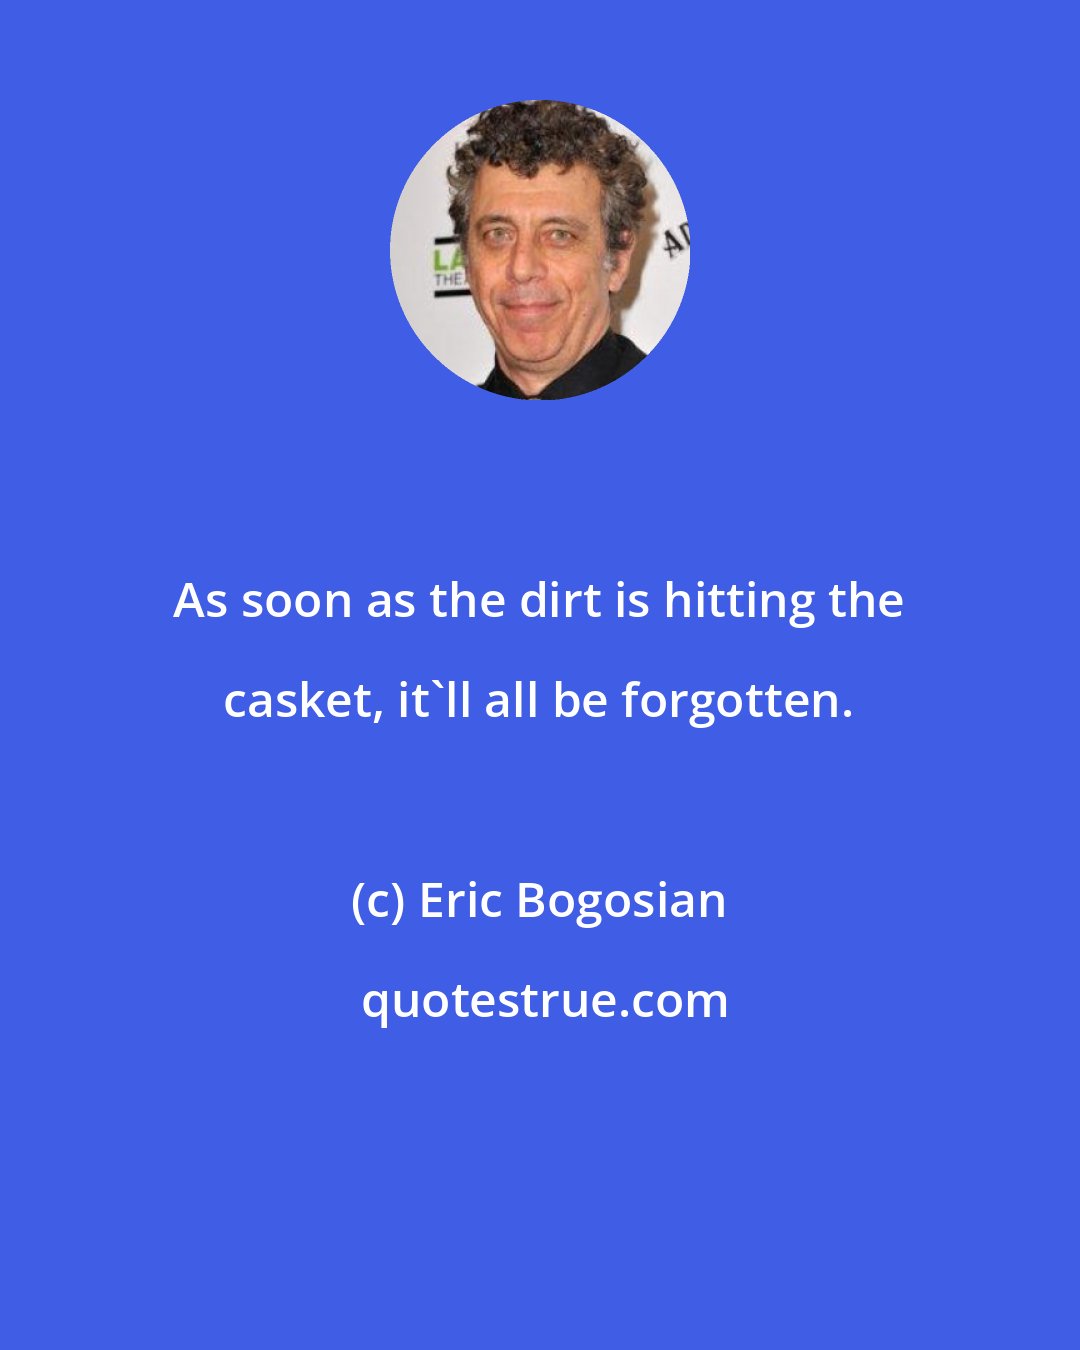 Eric Bogosian: As soon as the dirt is hitting the casket, it'll all be forgotten.